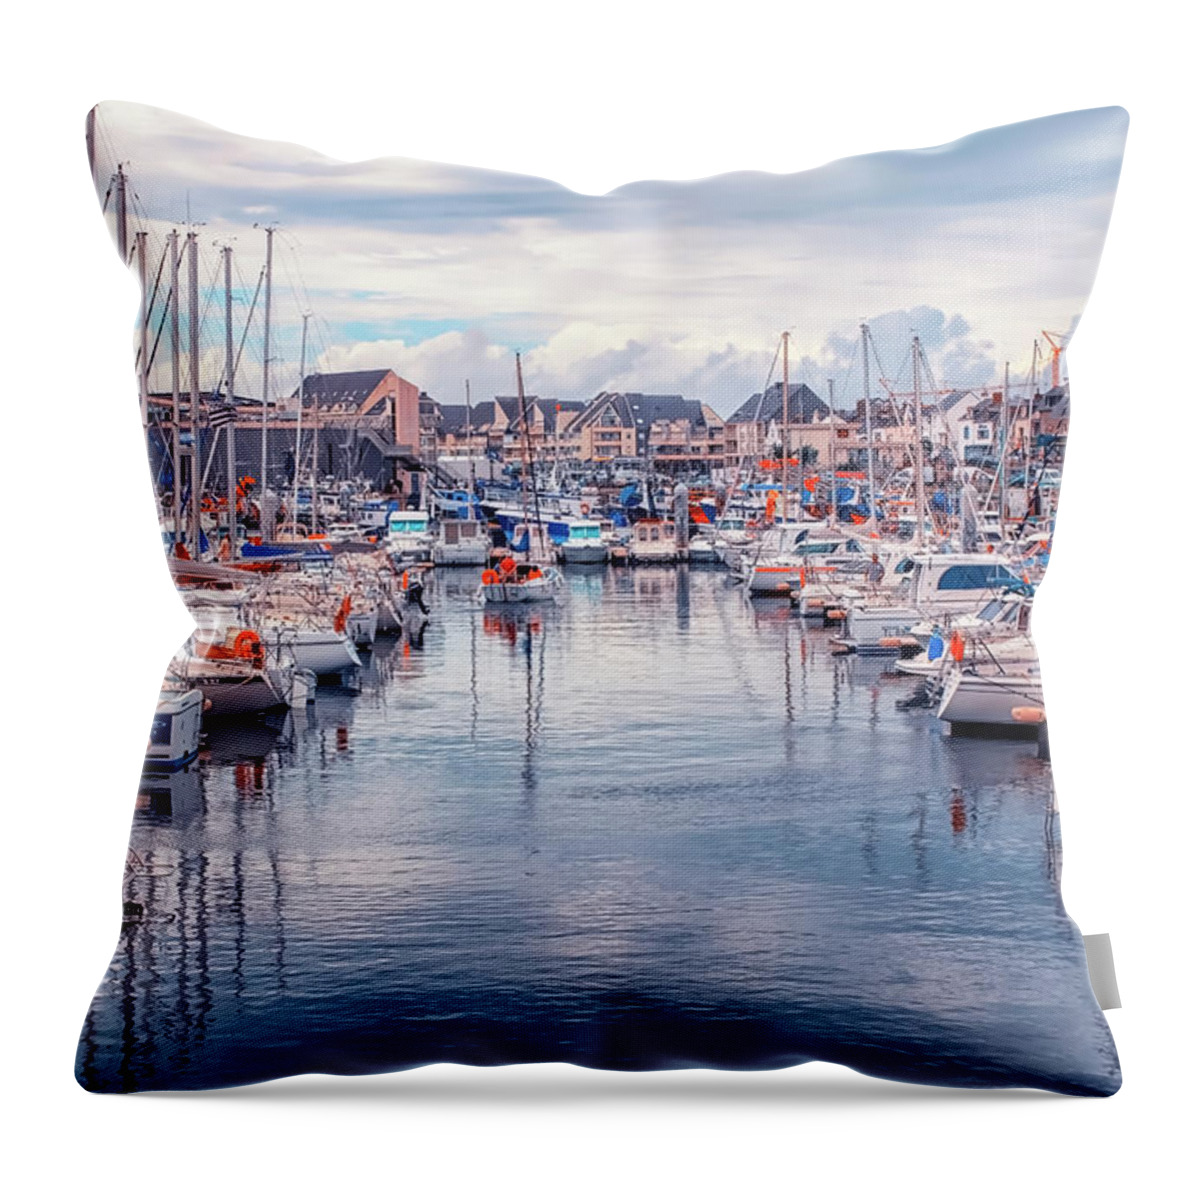 Aligned Throw Pillow featuring the photograph Guerande Harbor by Manjik Pictures